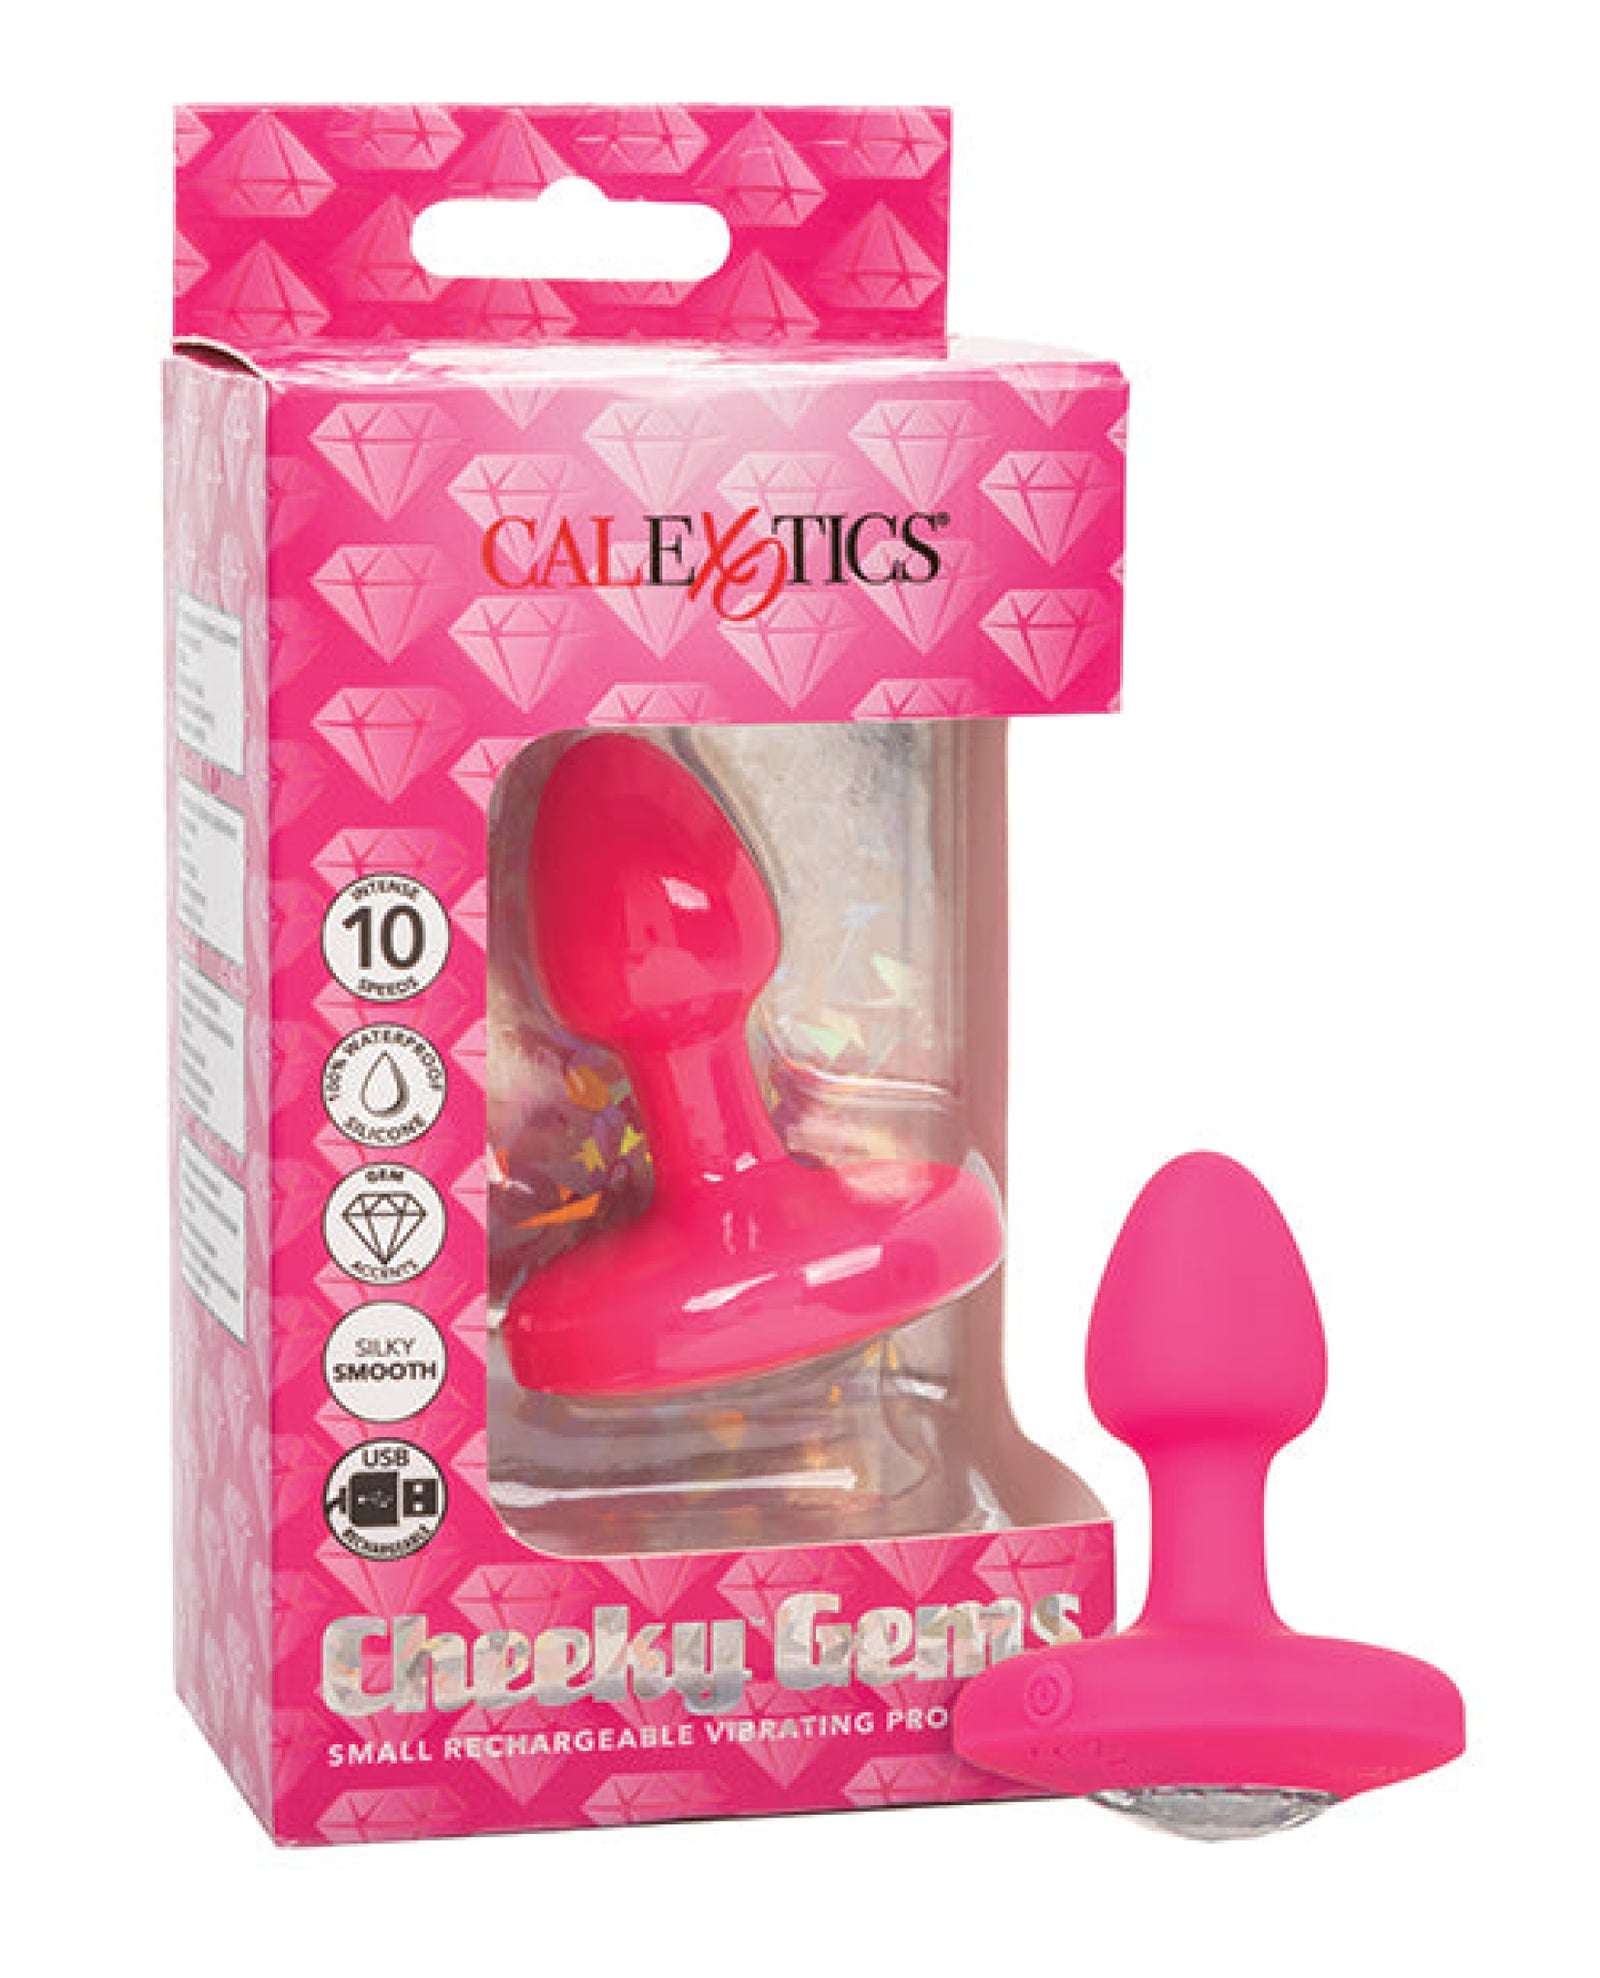 Cheeky Gems Small Rechargeable Vibrating Probe - Pink CalExotics